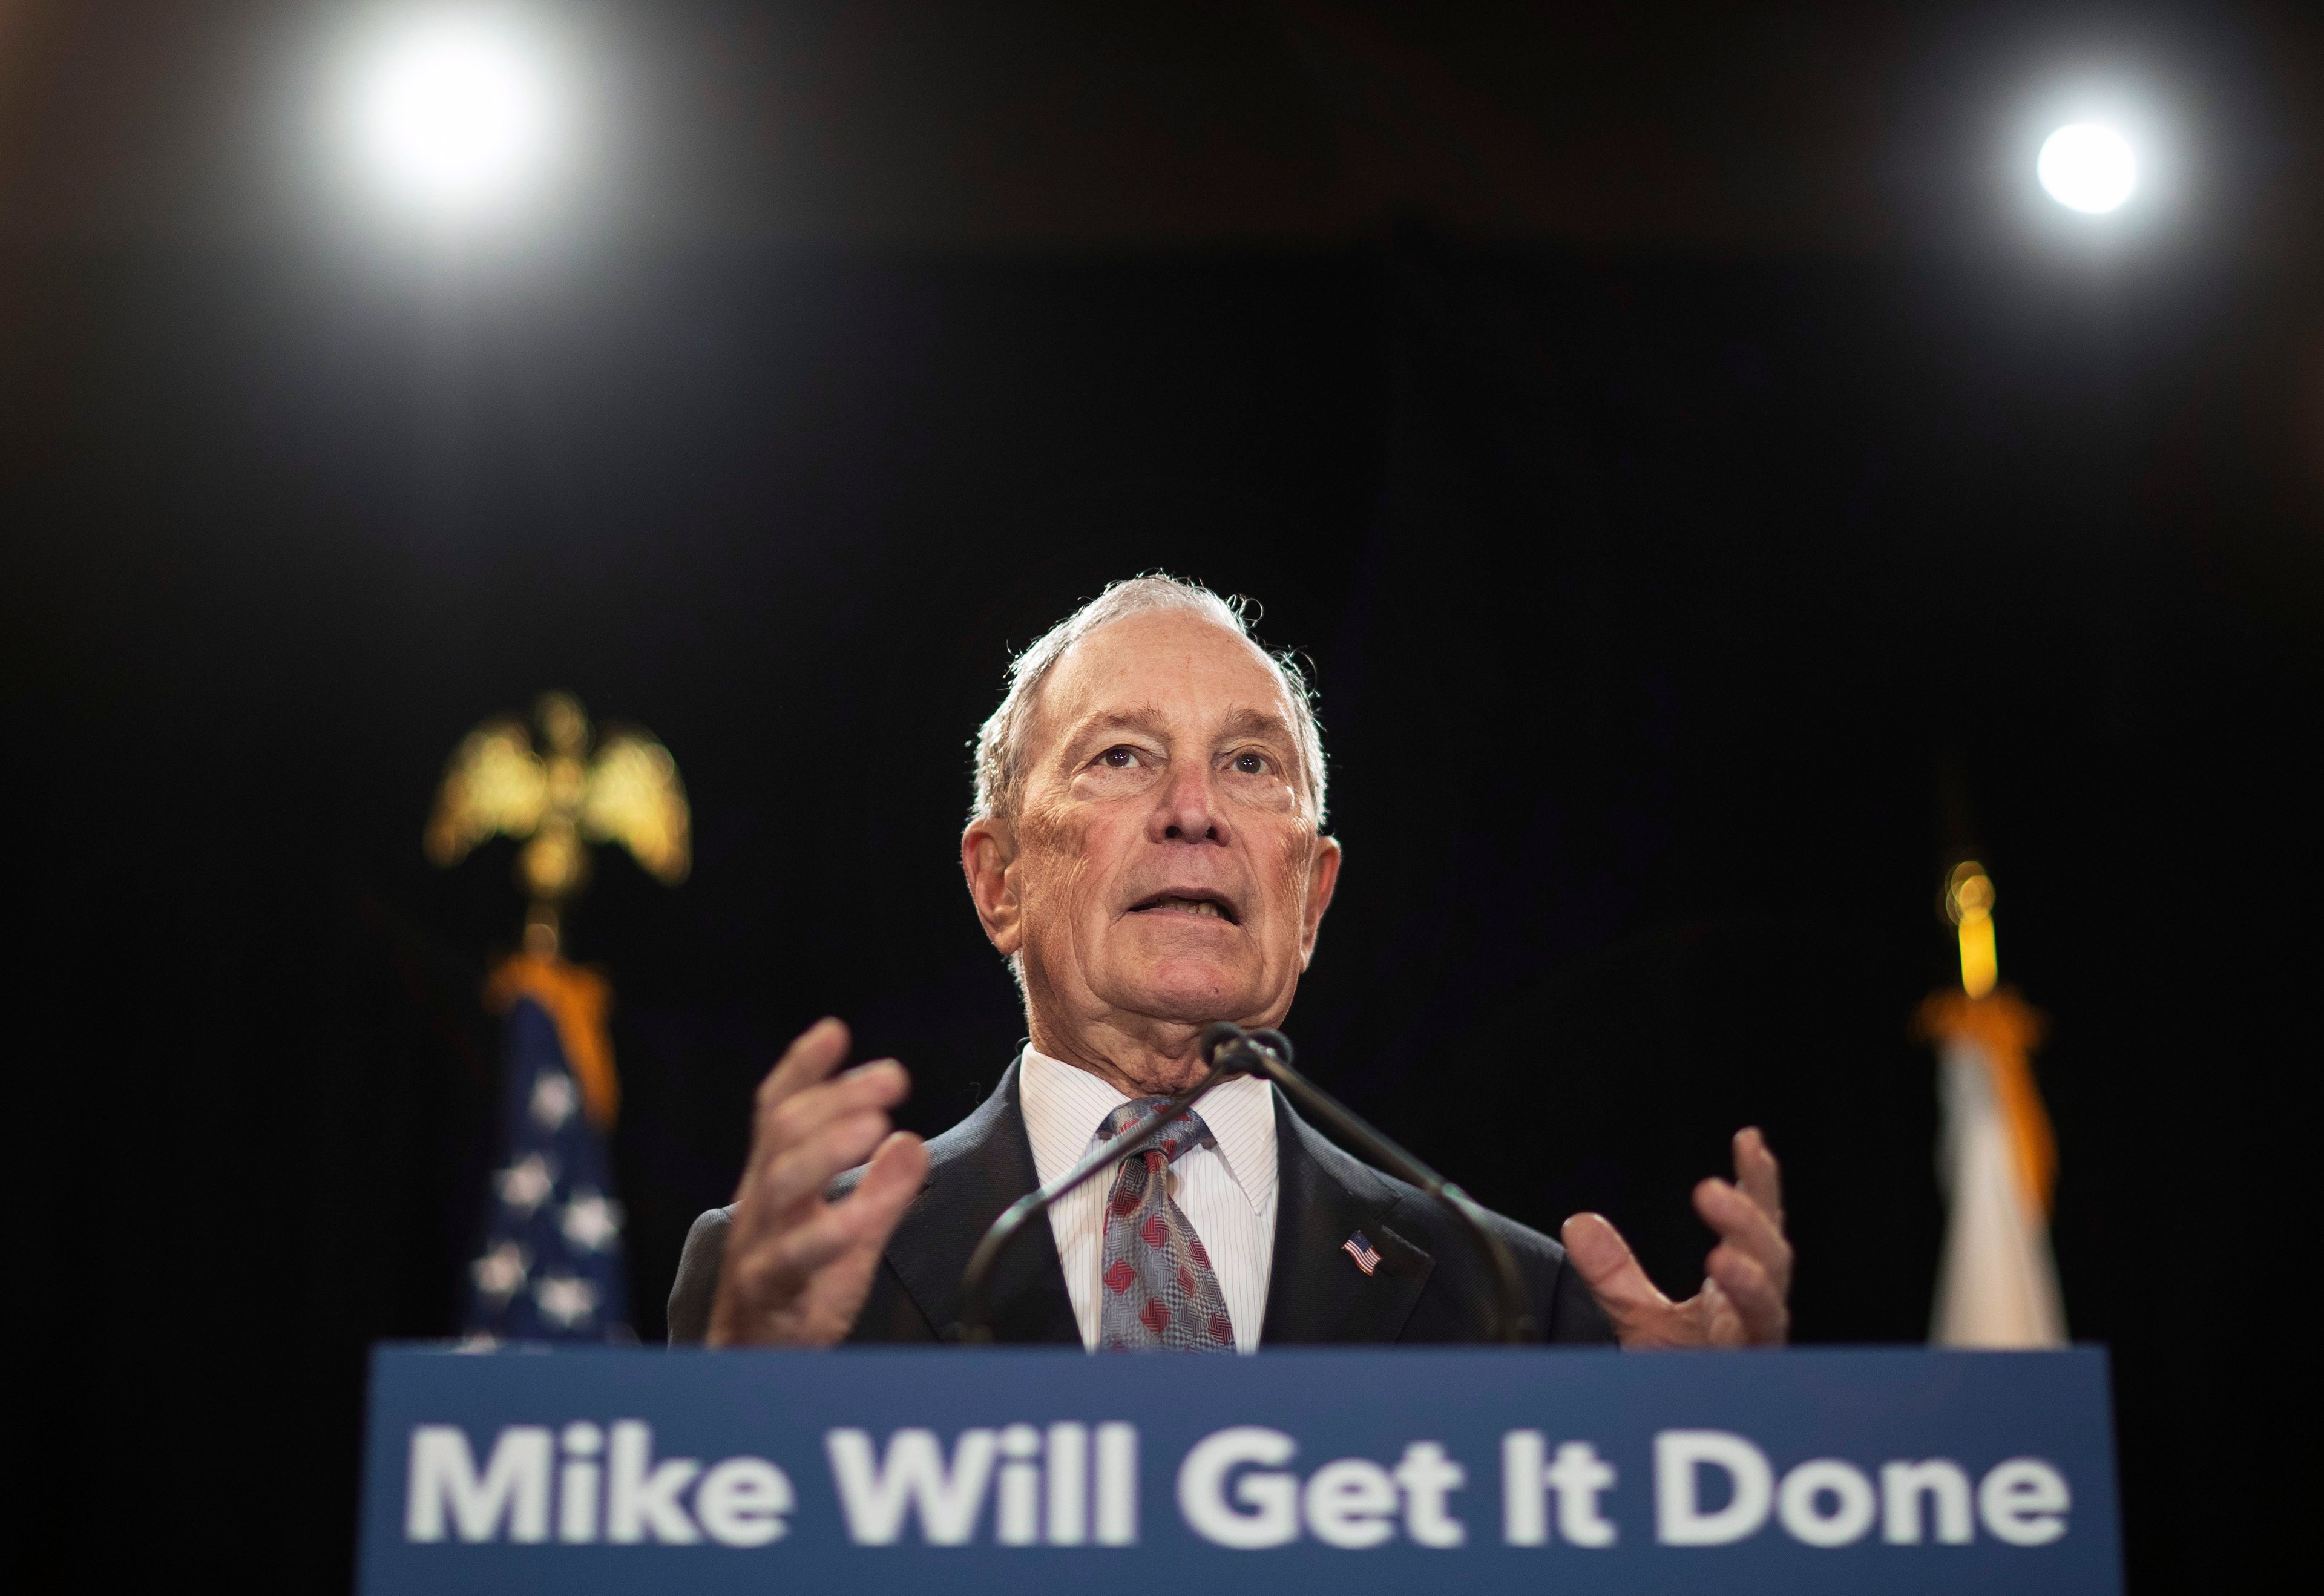 US-ELECTION-CANADIAN-LAWS-MICHAEL-BLOOMBERG-MOSCROP-FEB7